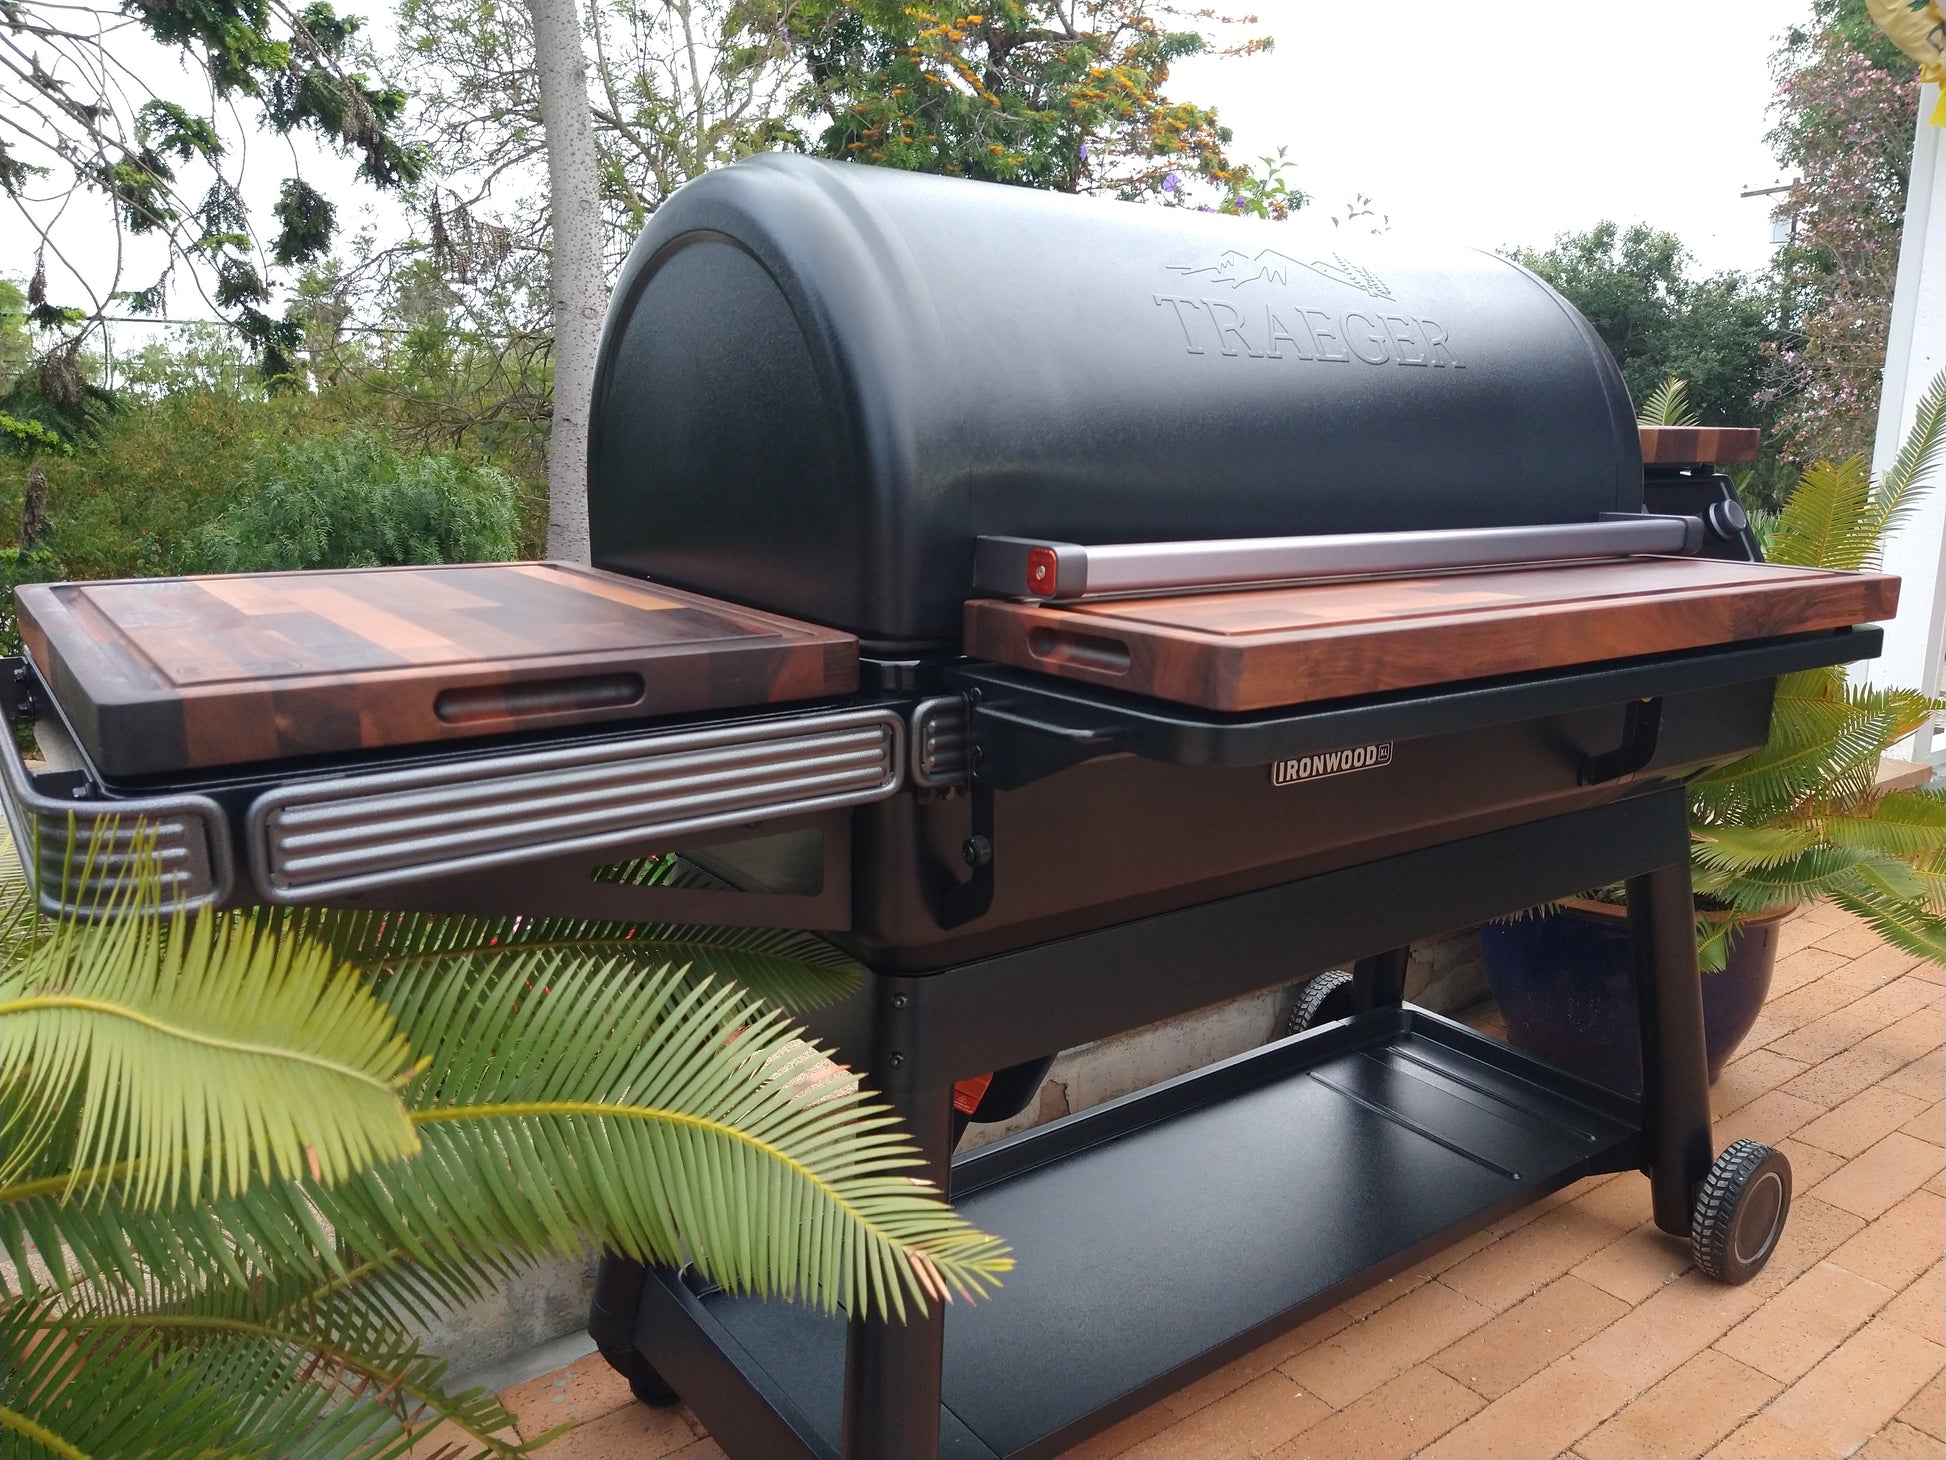 Traeger Ironwood XL Review: This Pellet Grill Smokes Its Competitors